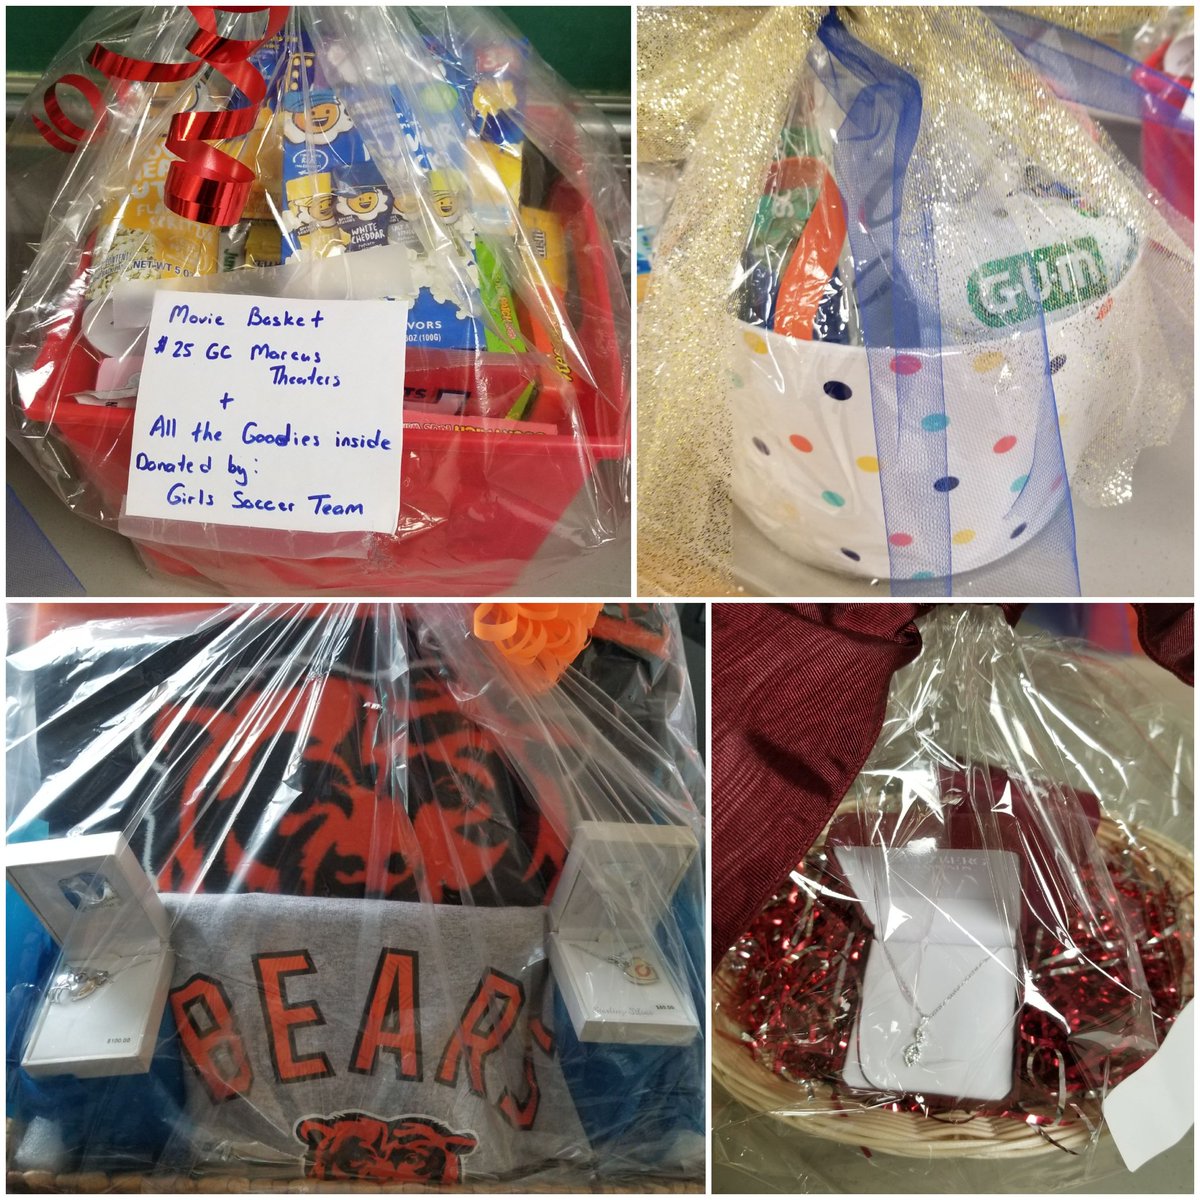 A HUGE shout out to our raffle basket crew that made 30 fabulous baskets! Here's a raffle basket sneak peek......hope to see you all this Thursday 2/27 at our Special Olympics fundraiser: Bingo Night. #GoLemont @LHS210principal @lhs210drflores @lhs210locascio